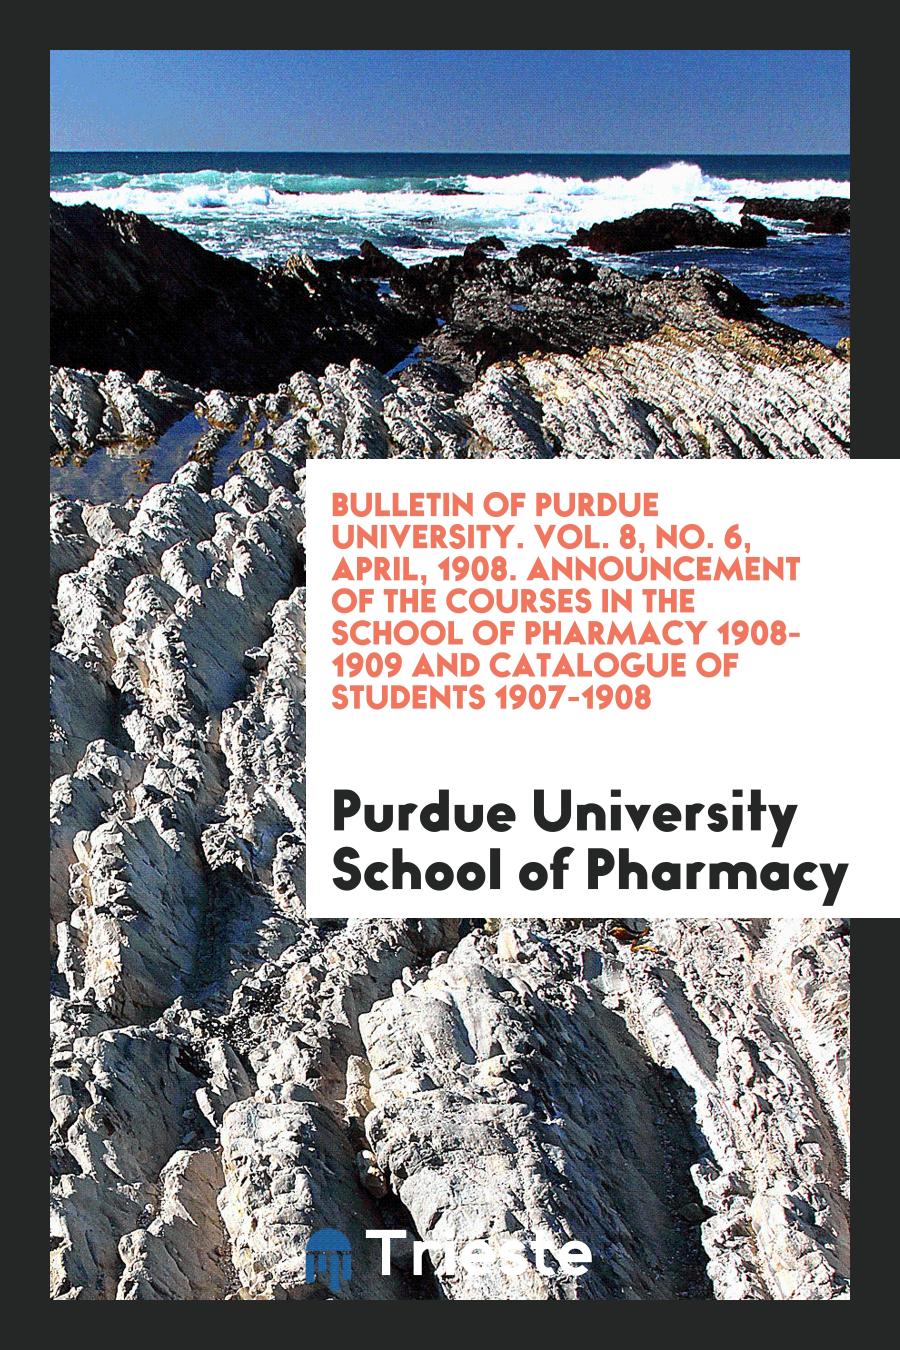 Bulletin of Purdue University. Vol. 8, No. 6, April, 1908. Announcement of the courses in the school of Pharmacy 1908-1909 and catalogue of students 1907-1908